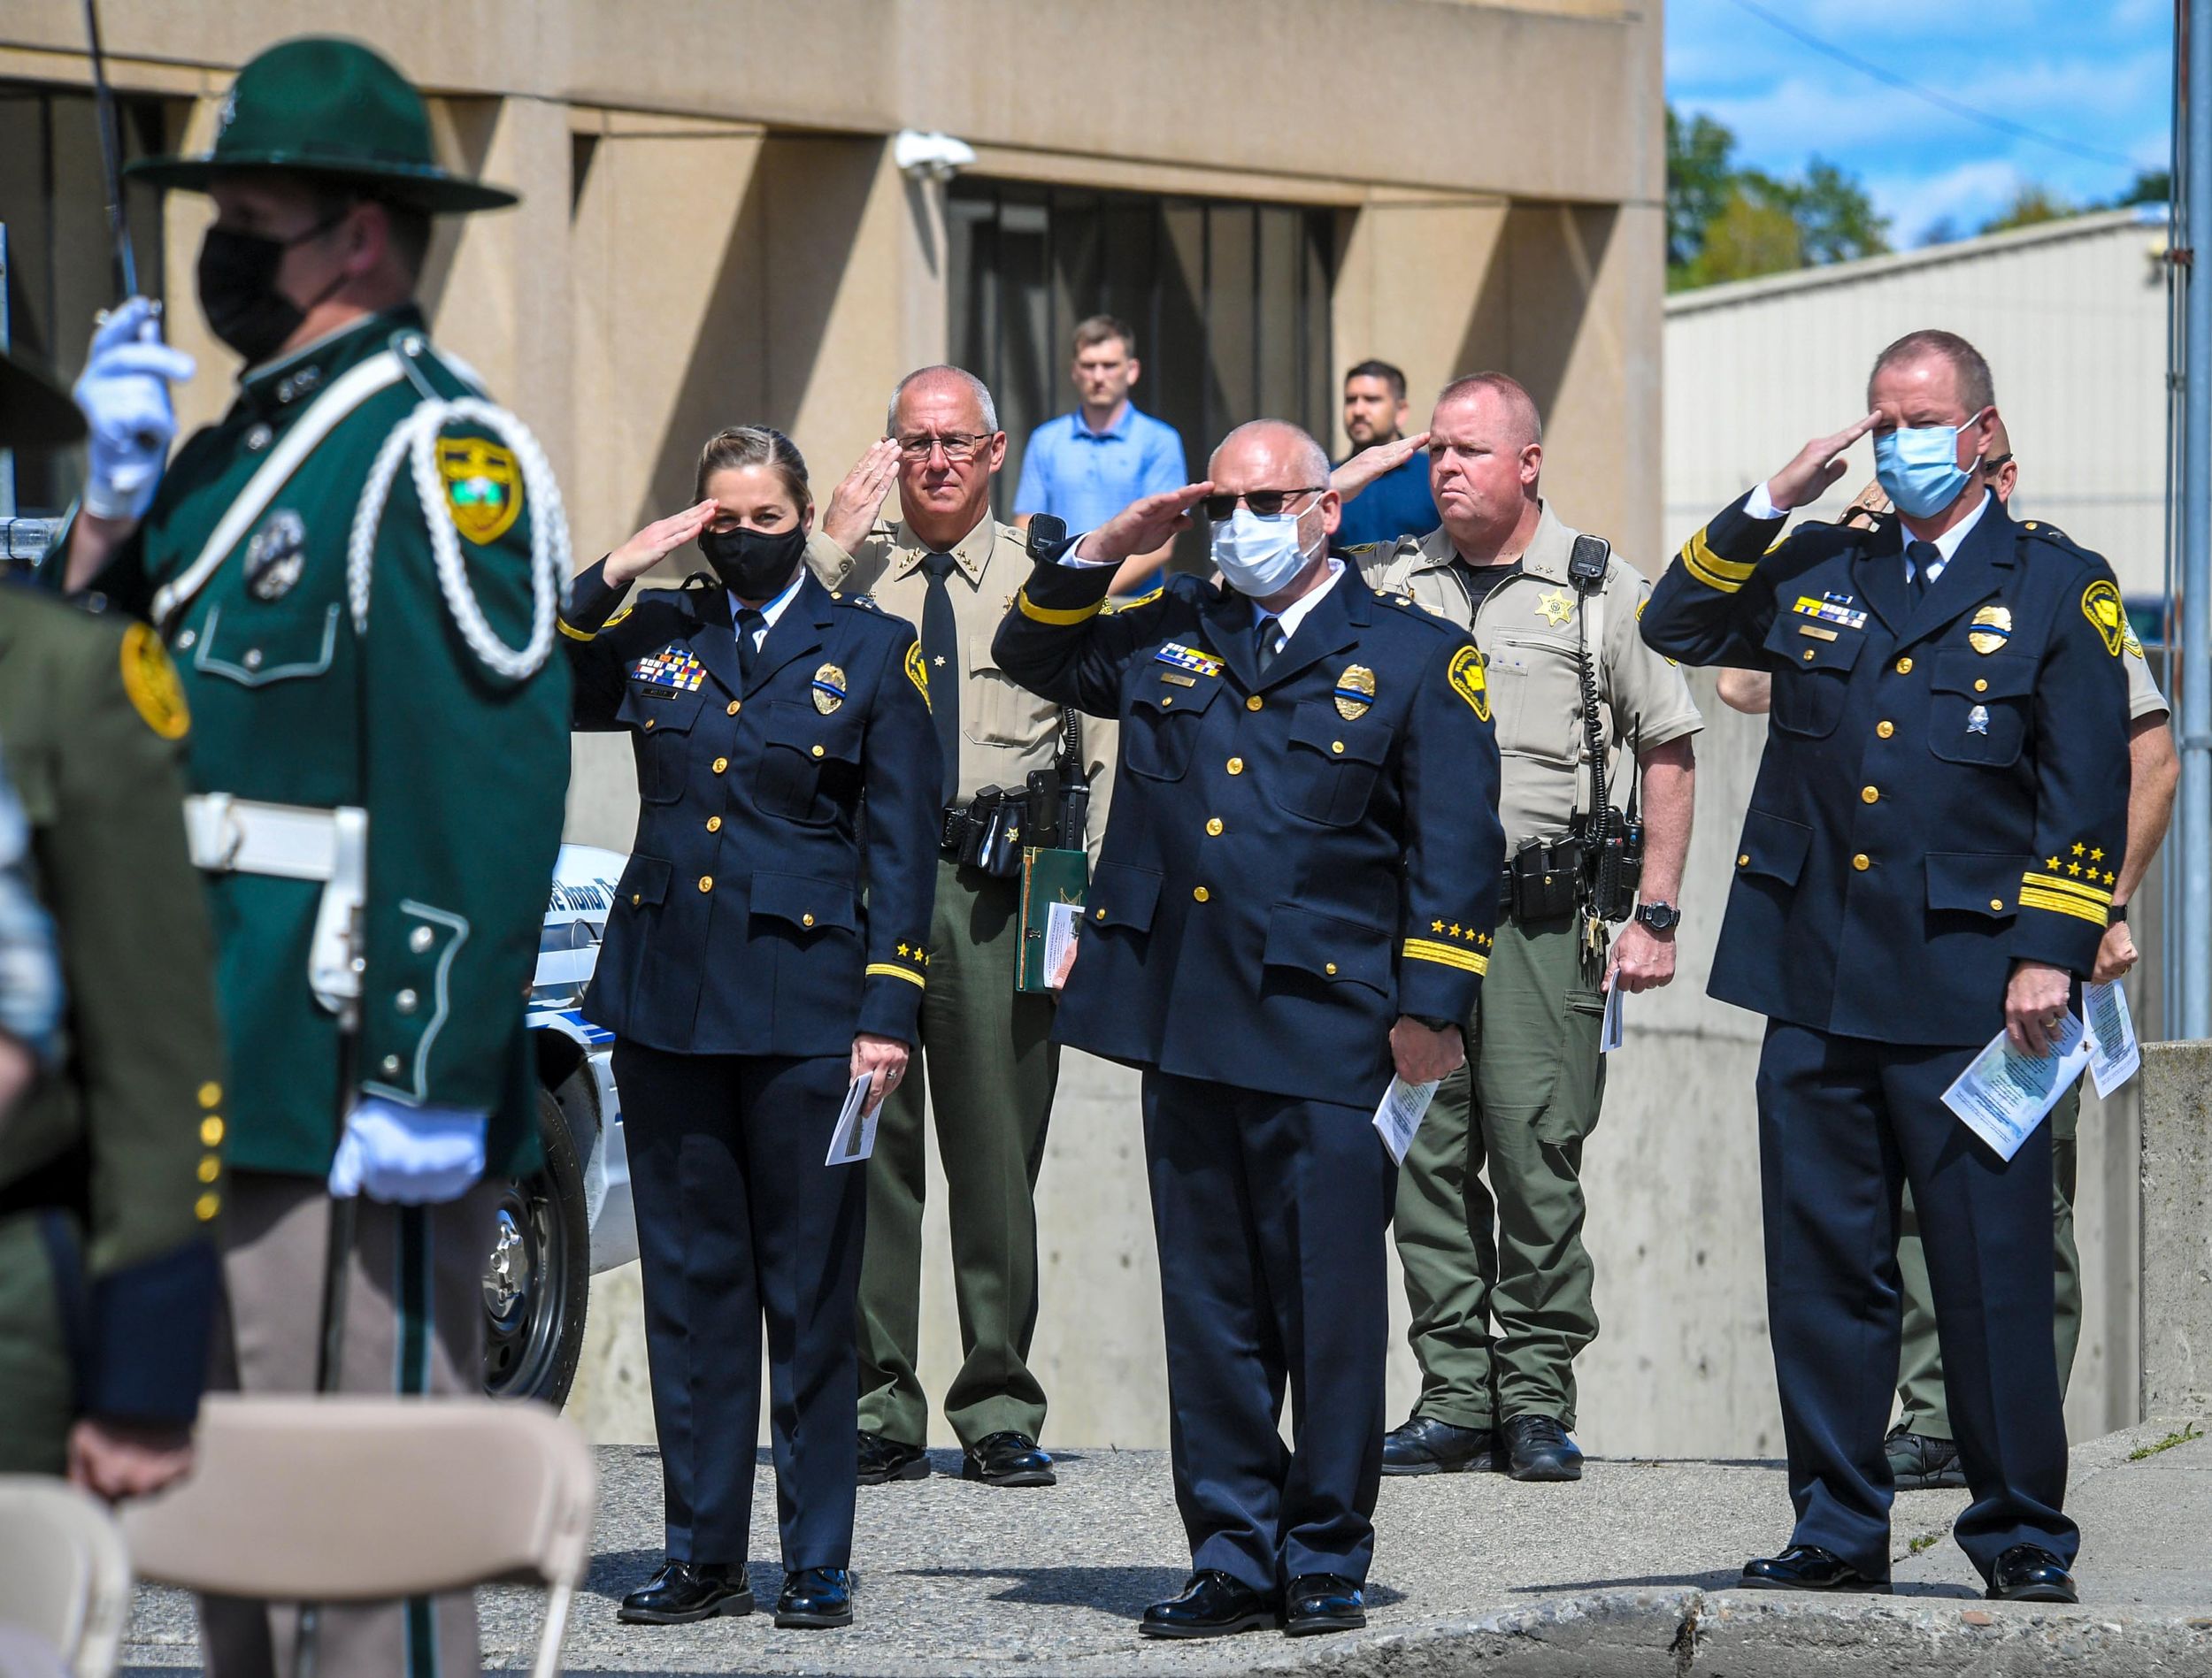 33rd Annual Law Enforcement Officers Memorial Ceremony May 4 2021 The Spokesman Review 4729